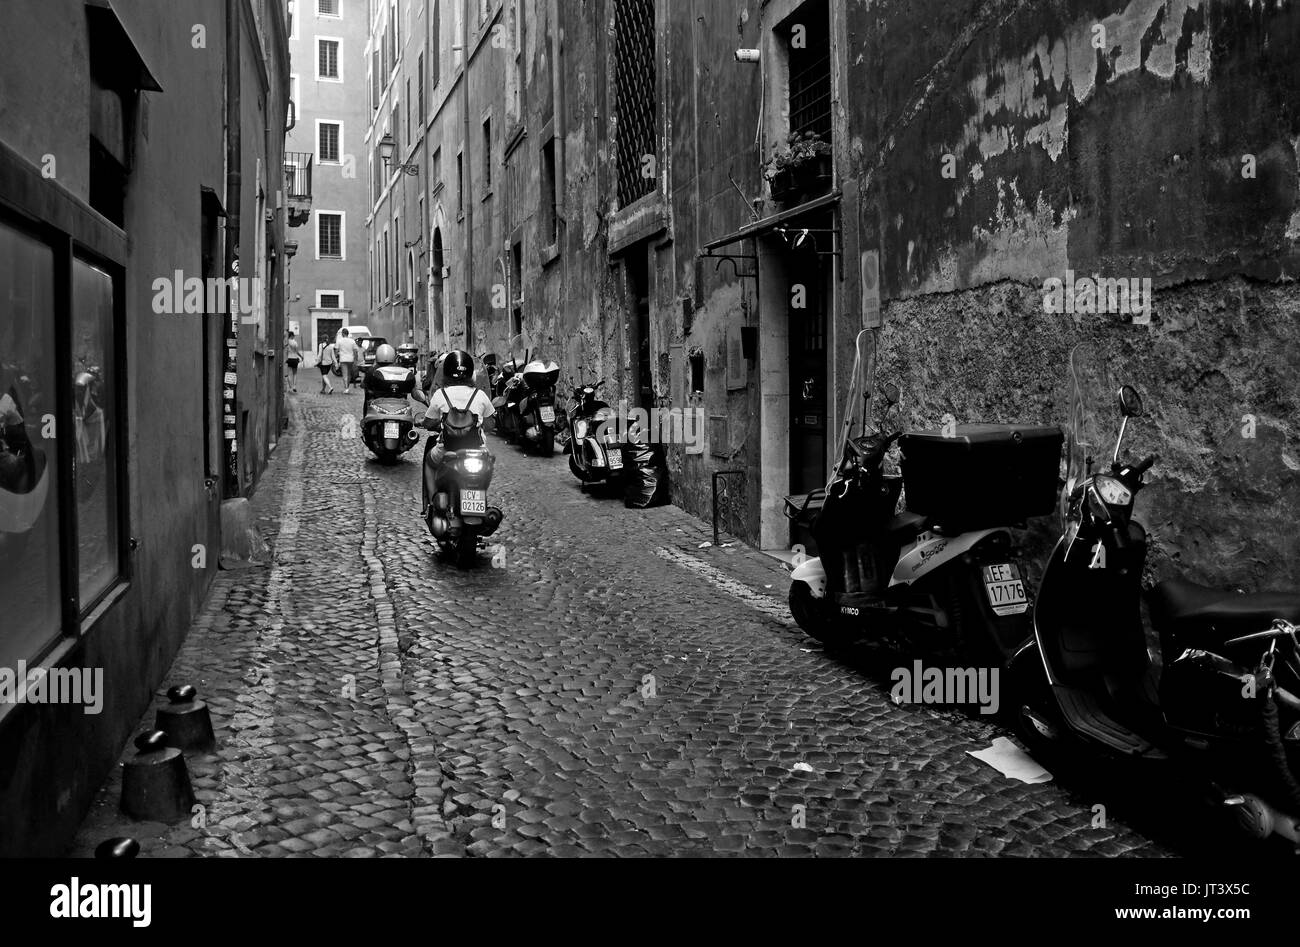 Rome Italy July 2017 - Typical narrow street with scooters in the Centro Storico district Photograph taken by Simon Dack Stock Photo